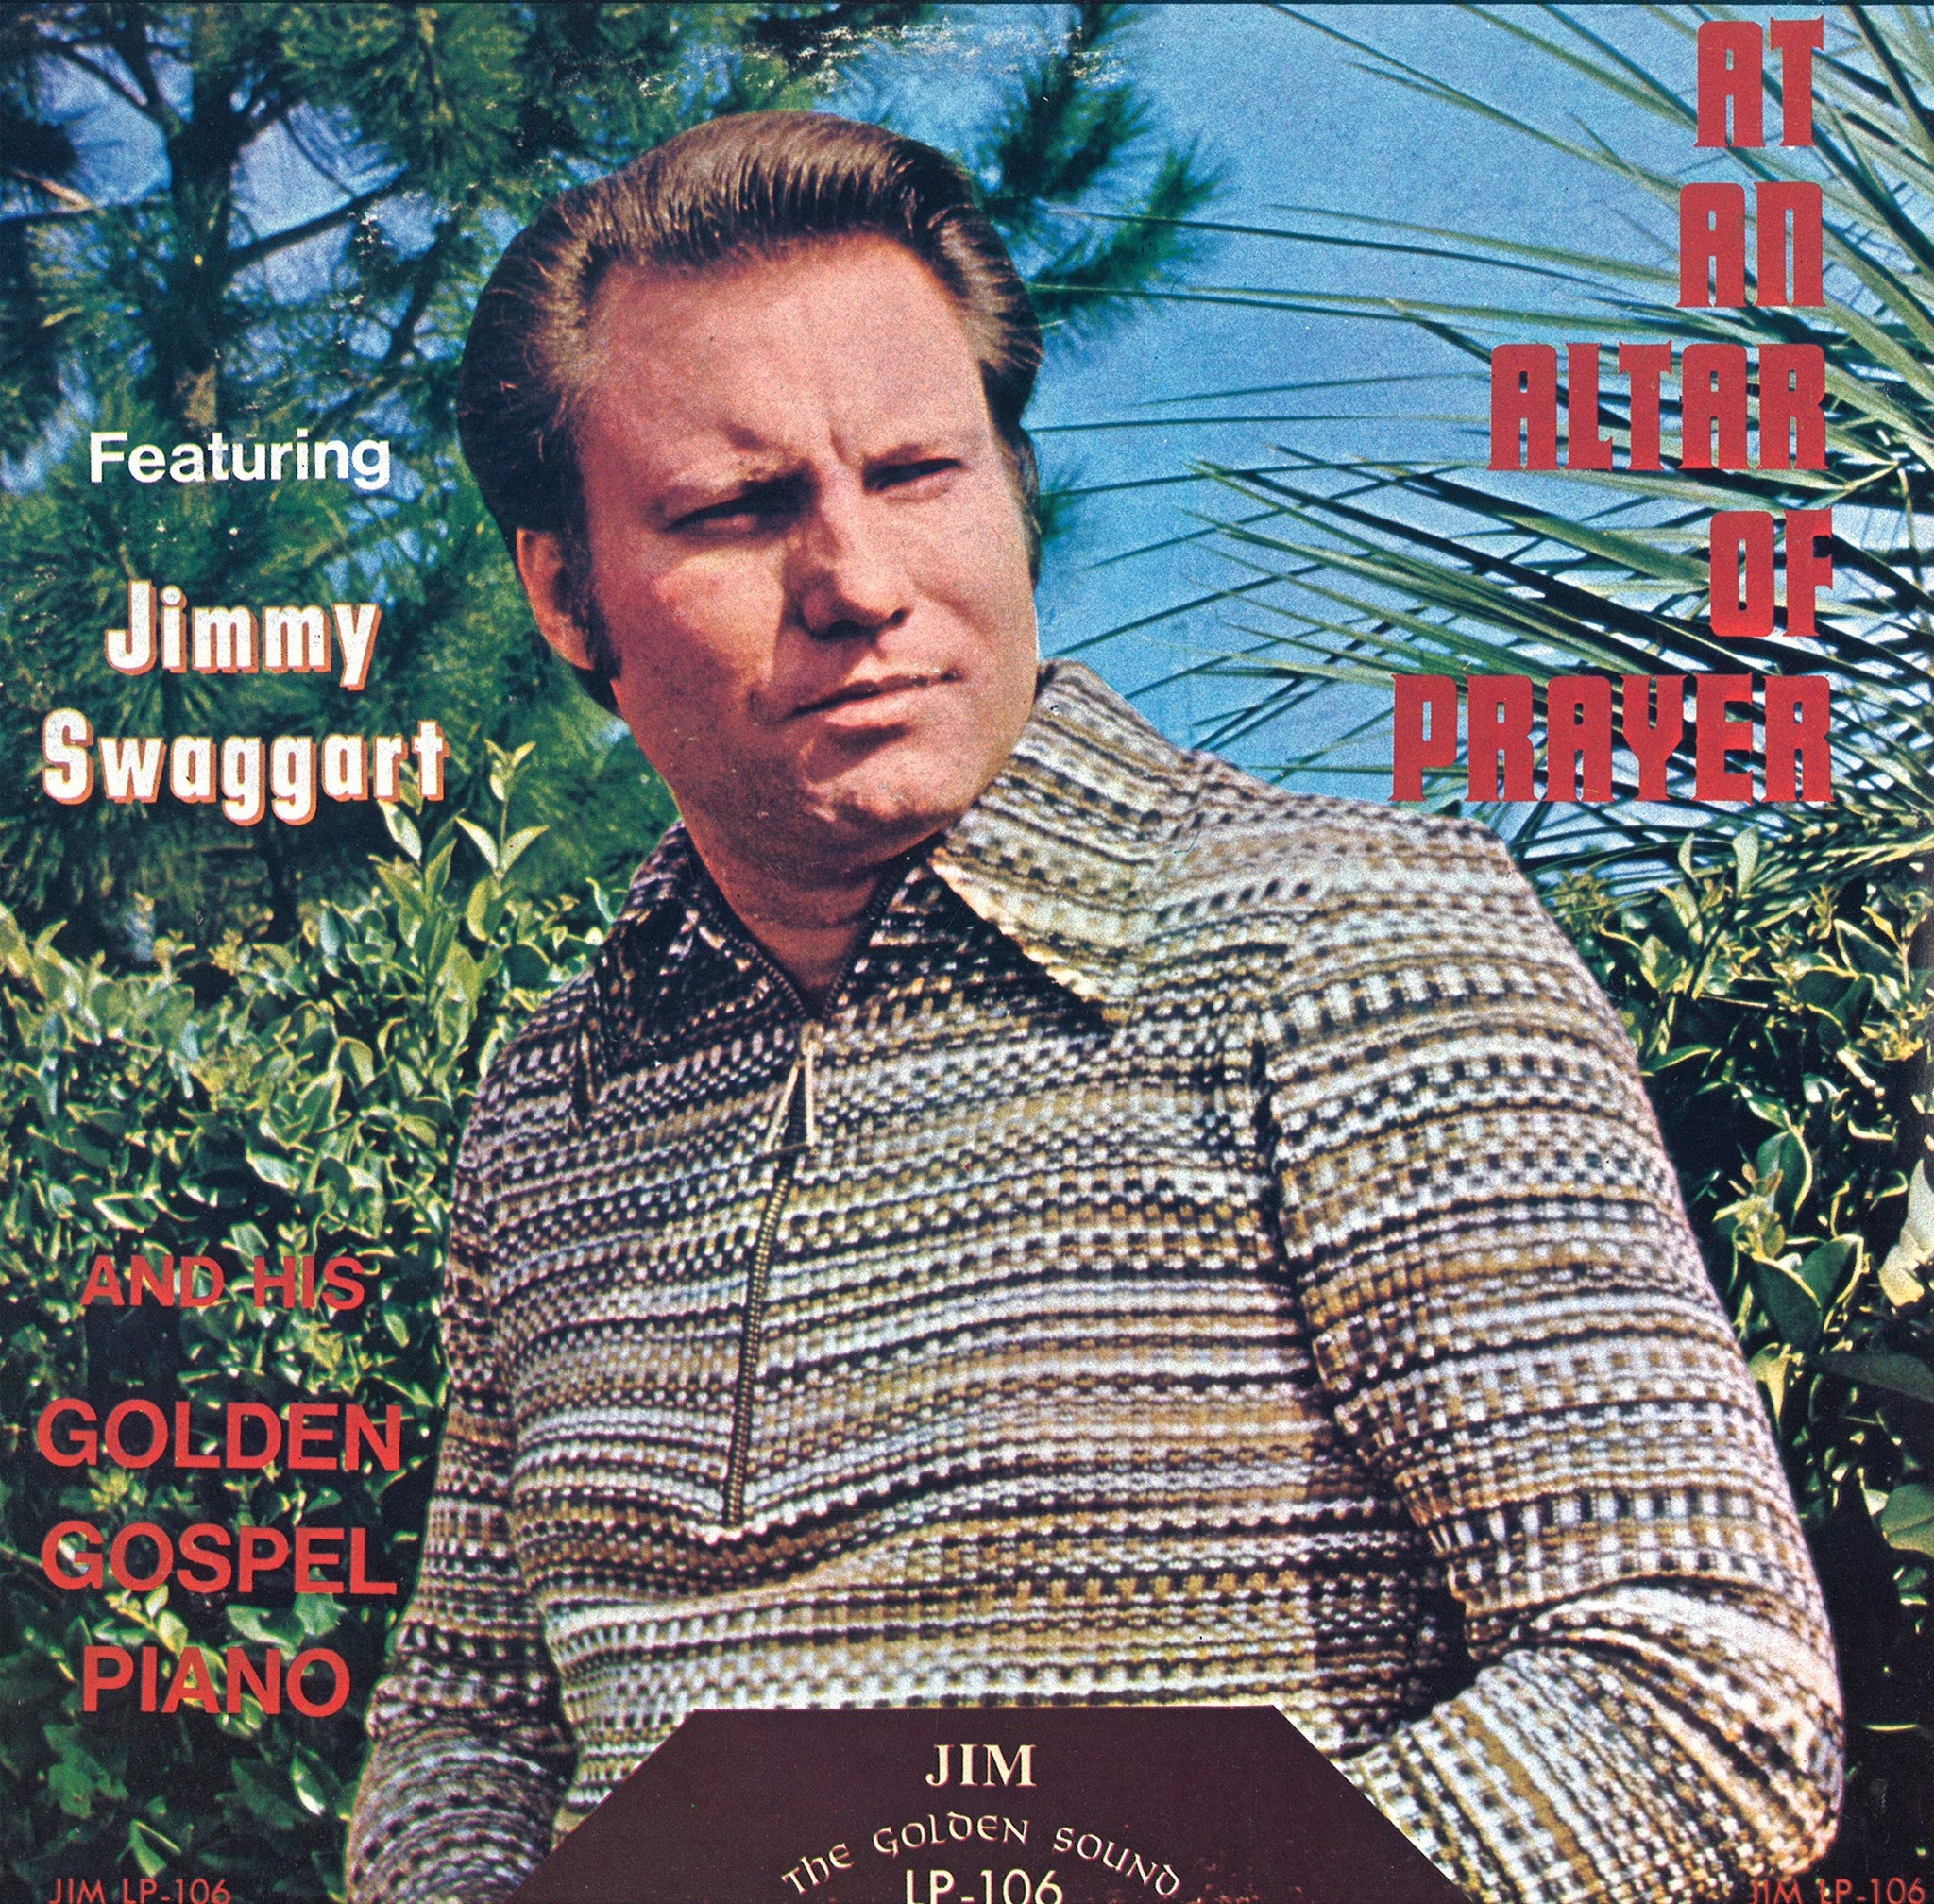 Jimmy Swaggart At An Altar Of Prayer